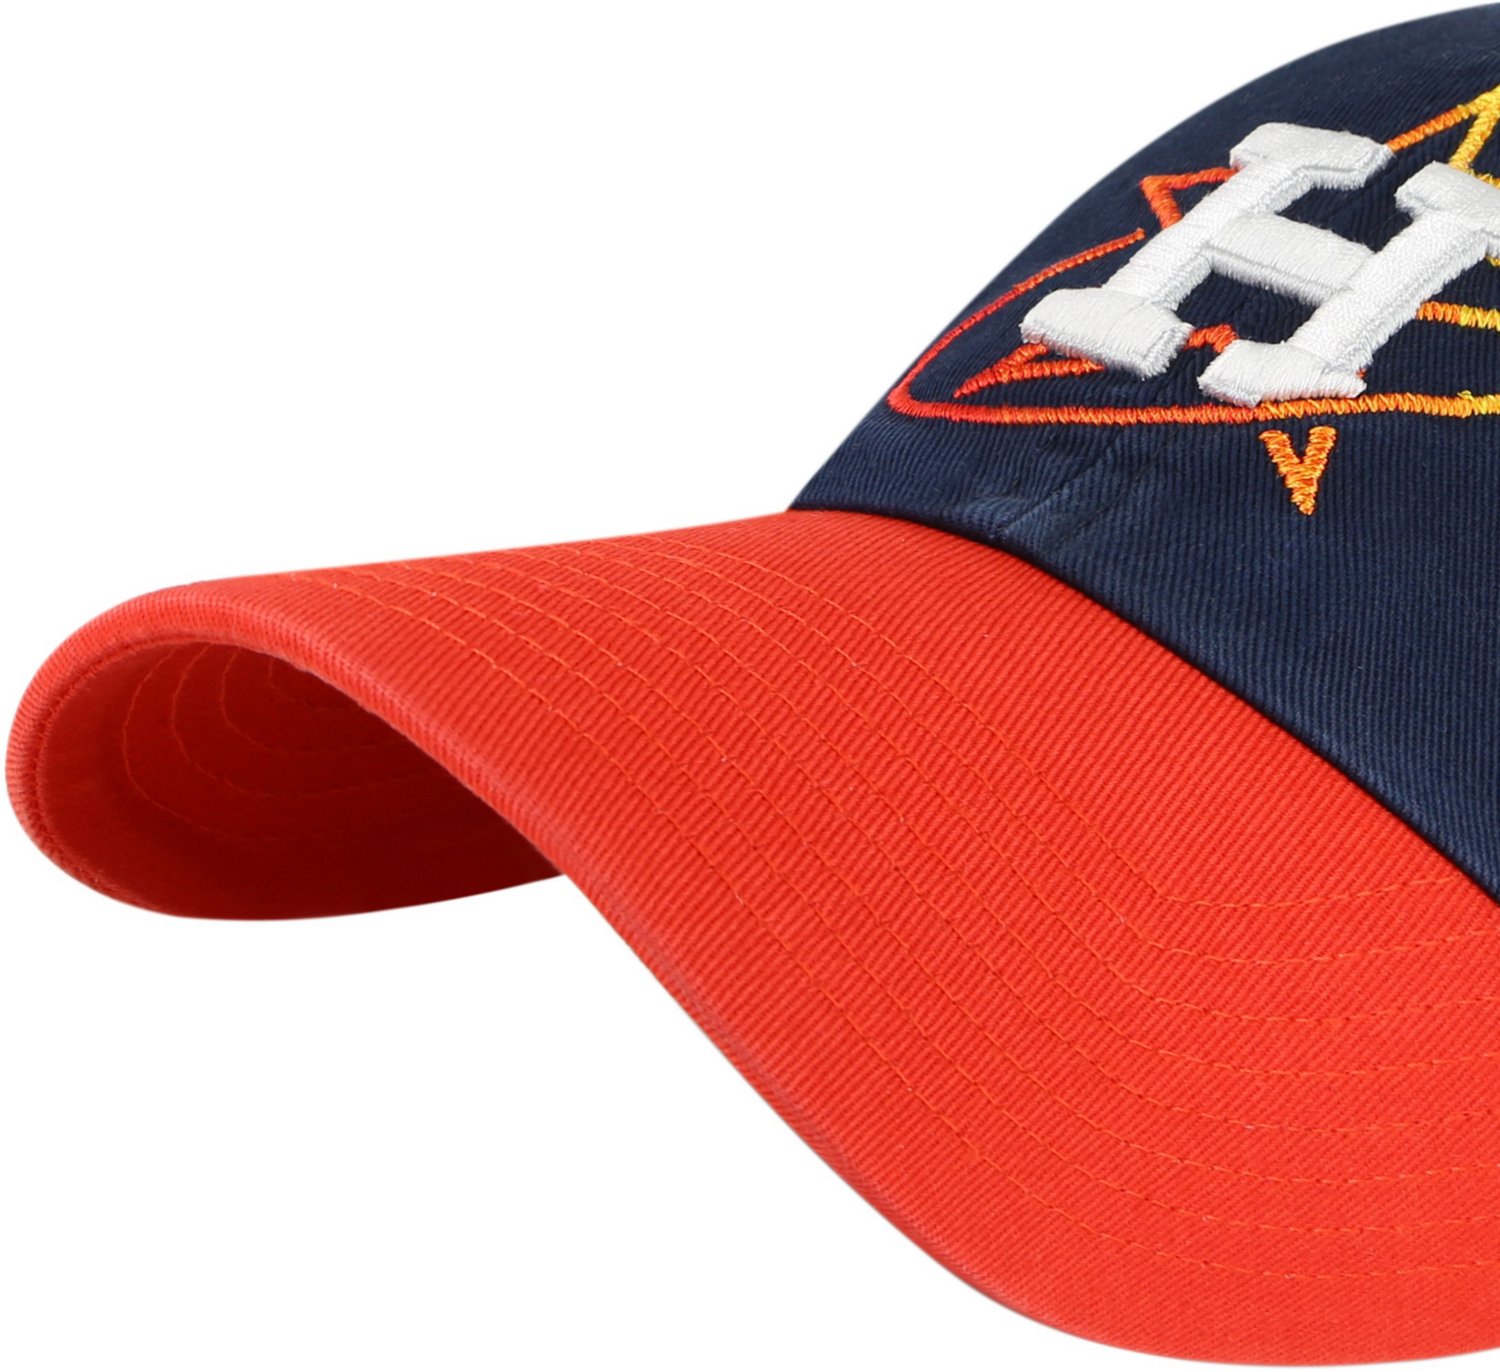  HOUSTON ASTROS COOPERSTOWN '47 CLEAN UP OSF / Blue : Sports &  Outdoors